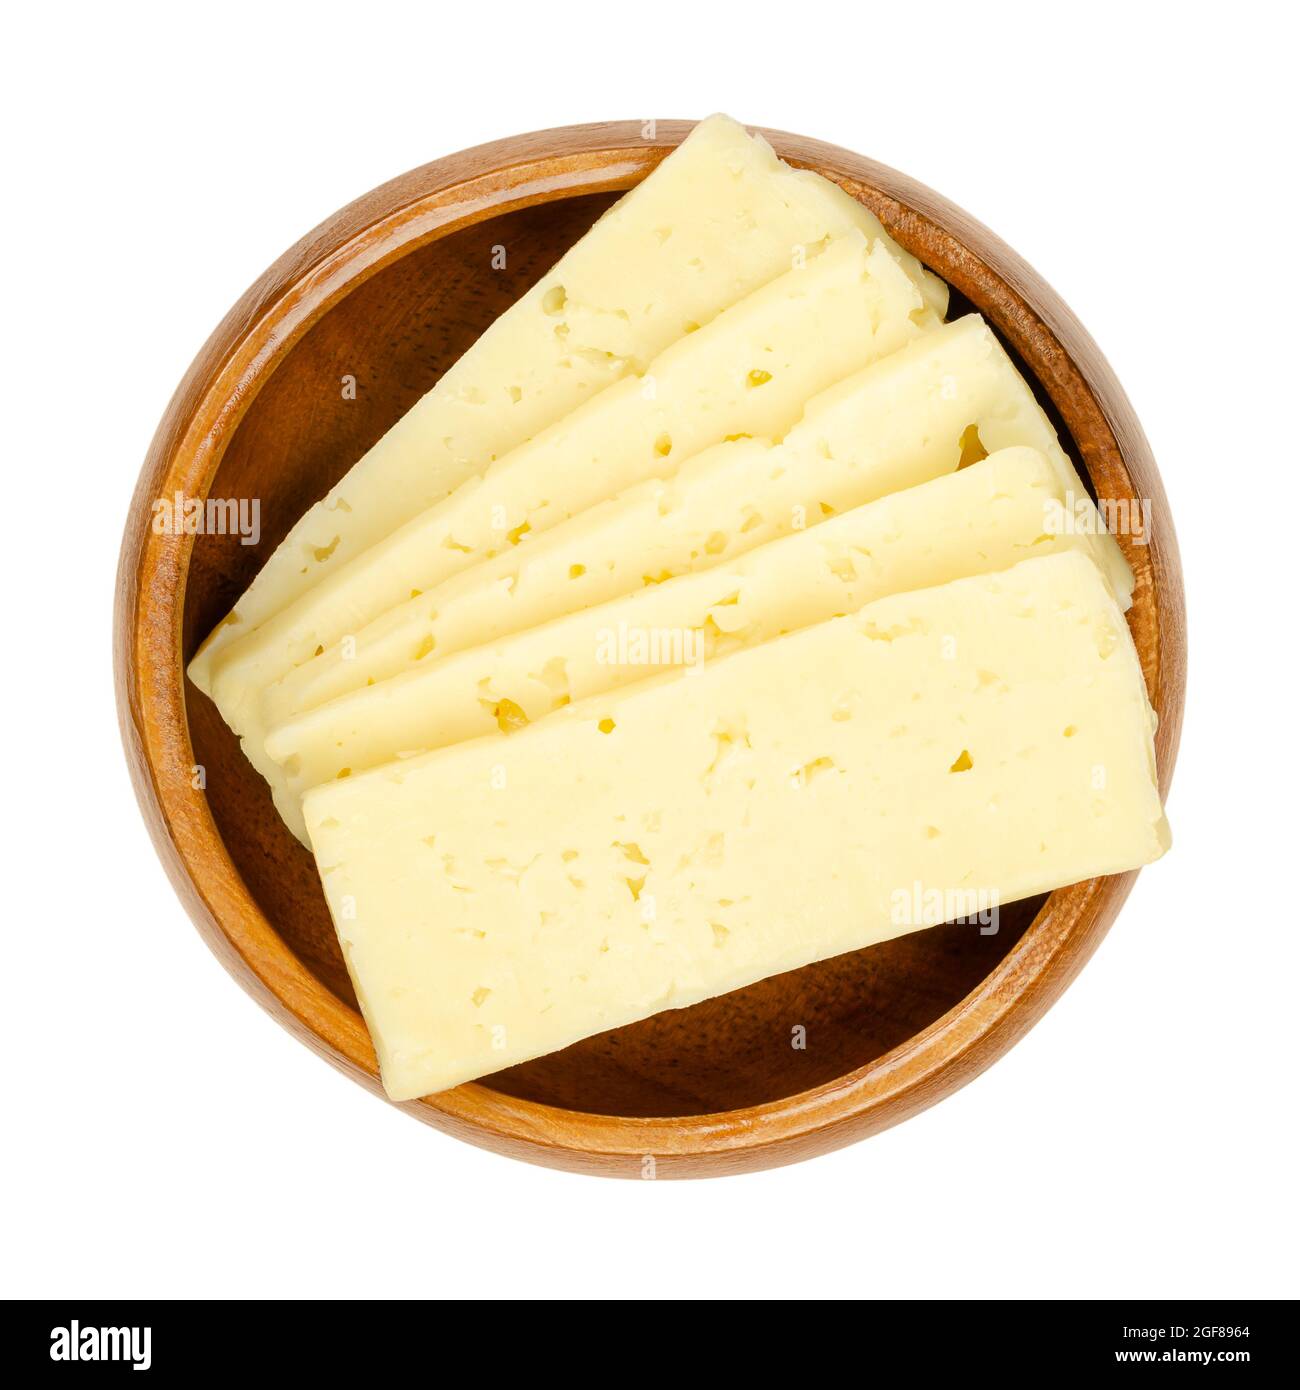 Tilsit cheese slices, in a wooden bowl. Sliced Tilsiter cheese, a pale yellow semi hard smear-ripened cheese, with a medium-firm texture. Stock Photo